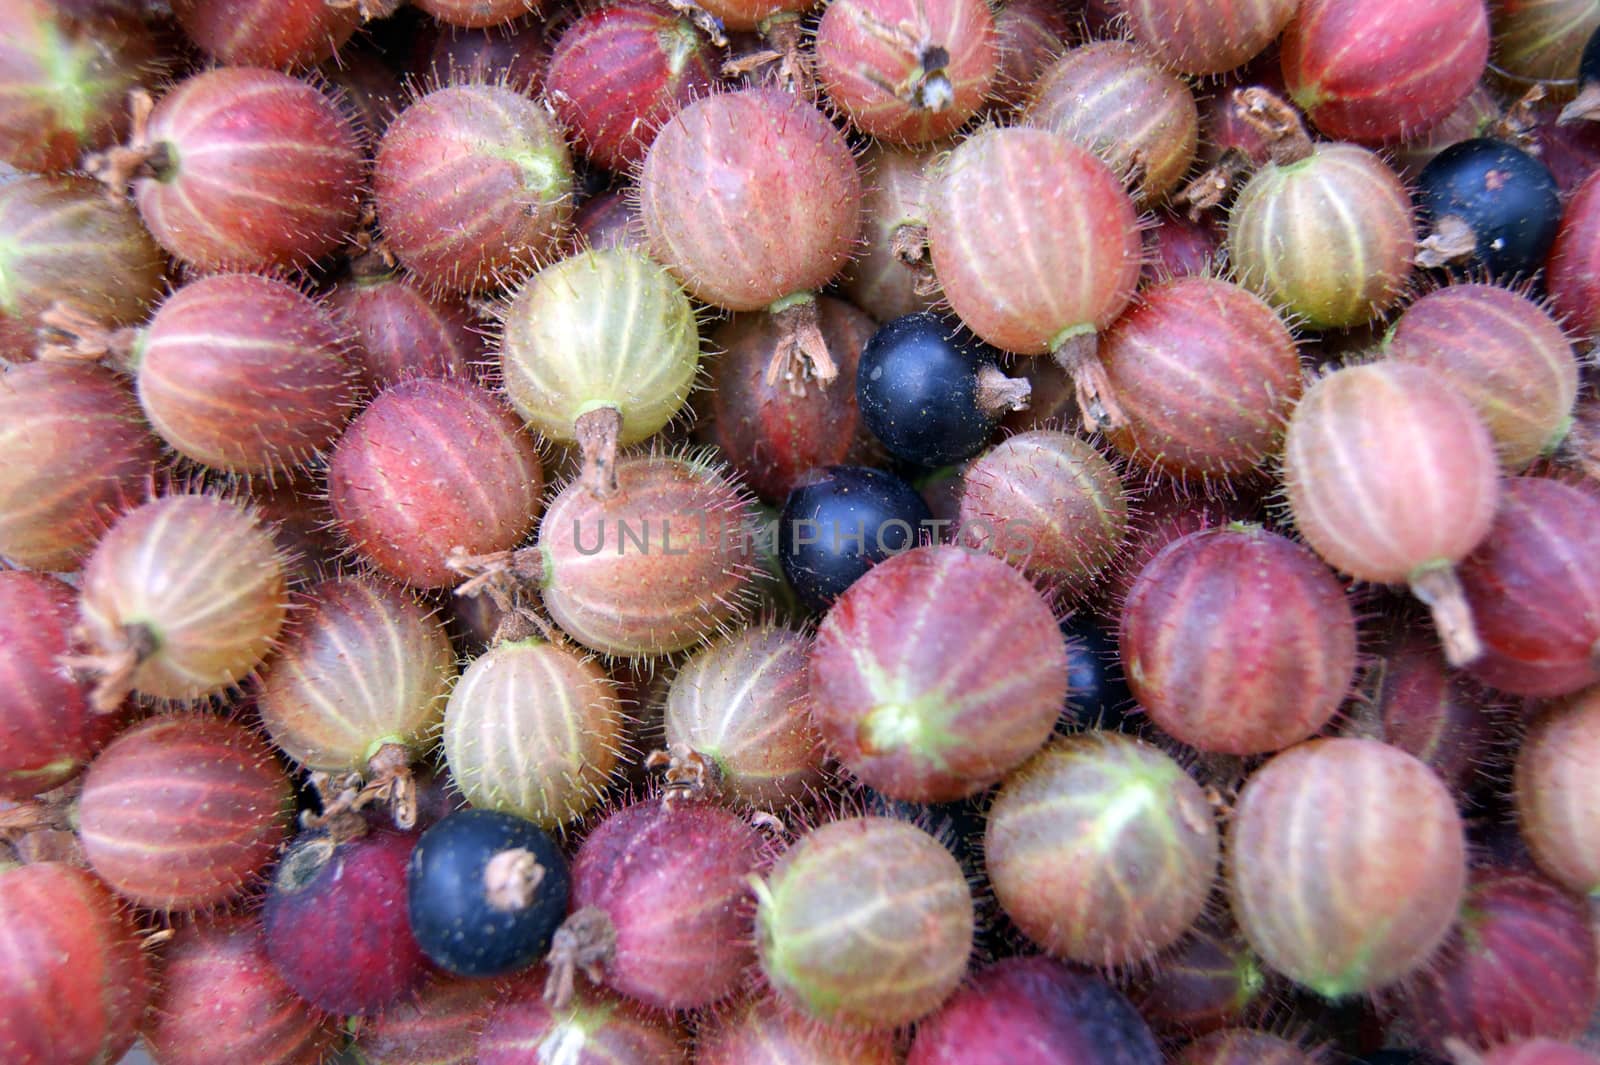 Collected berries of the gooseberry by cobol1964